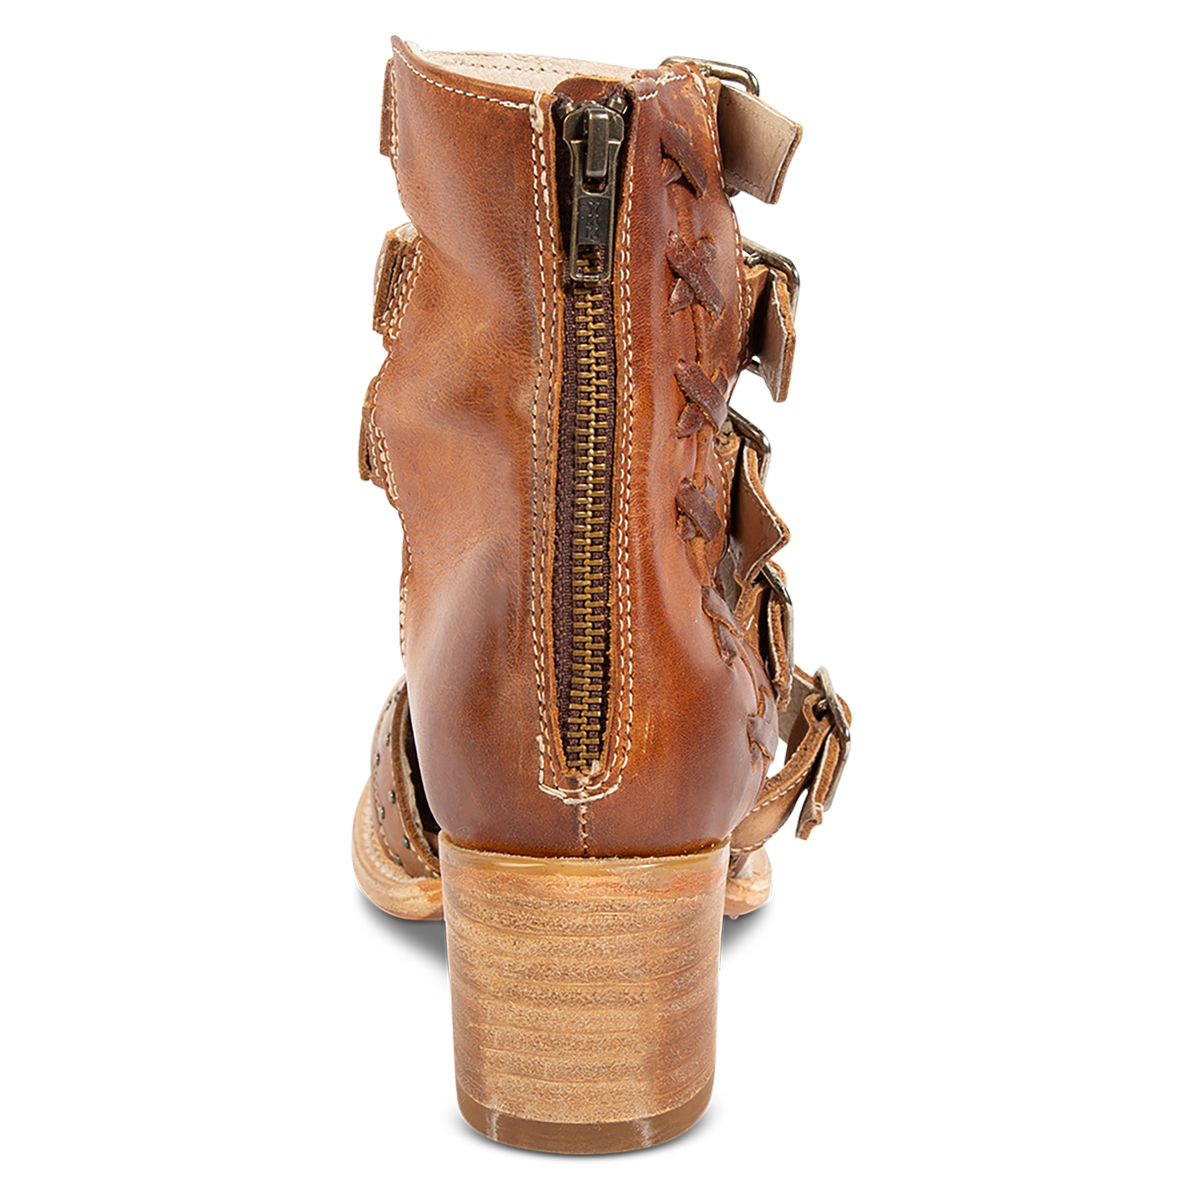 Back view showing a working brass hardware zipper and stacked heel on FREEBIRD women's Salty wheat leather bootie